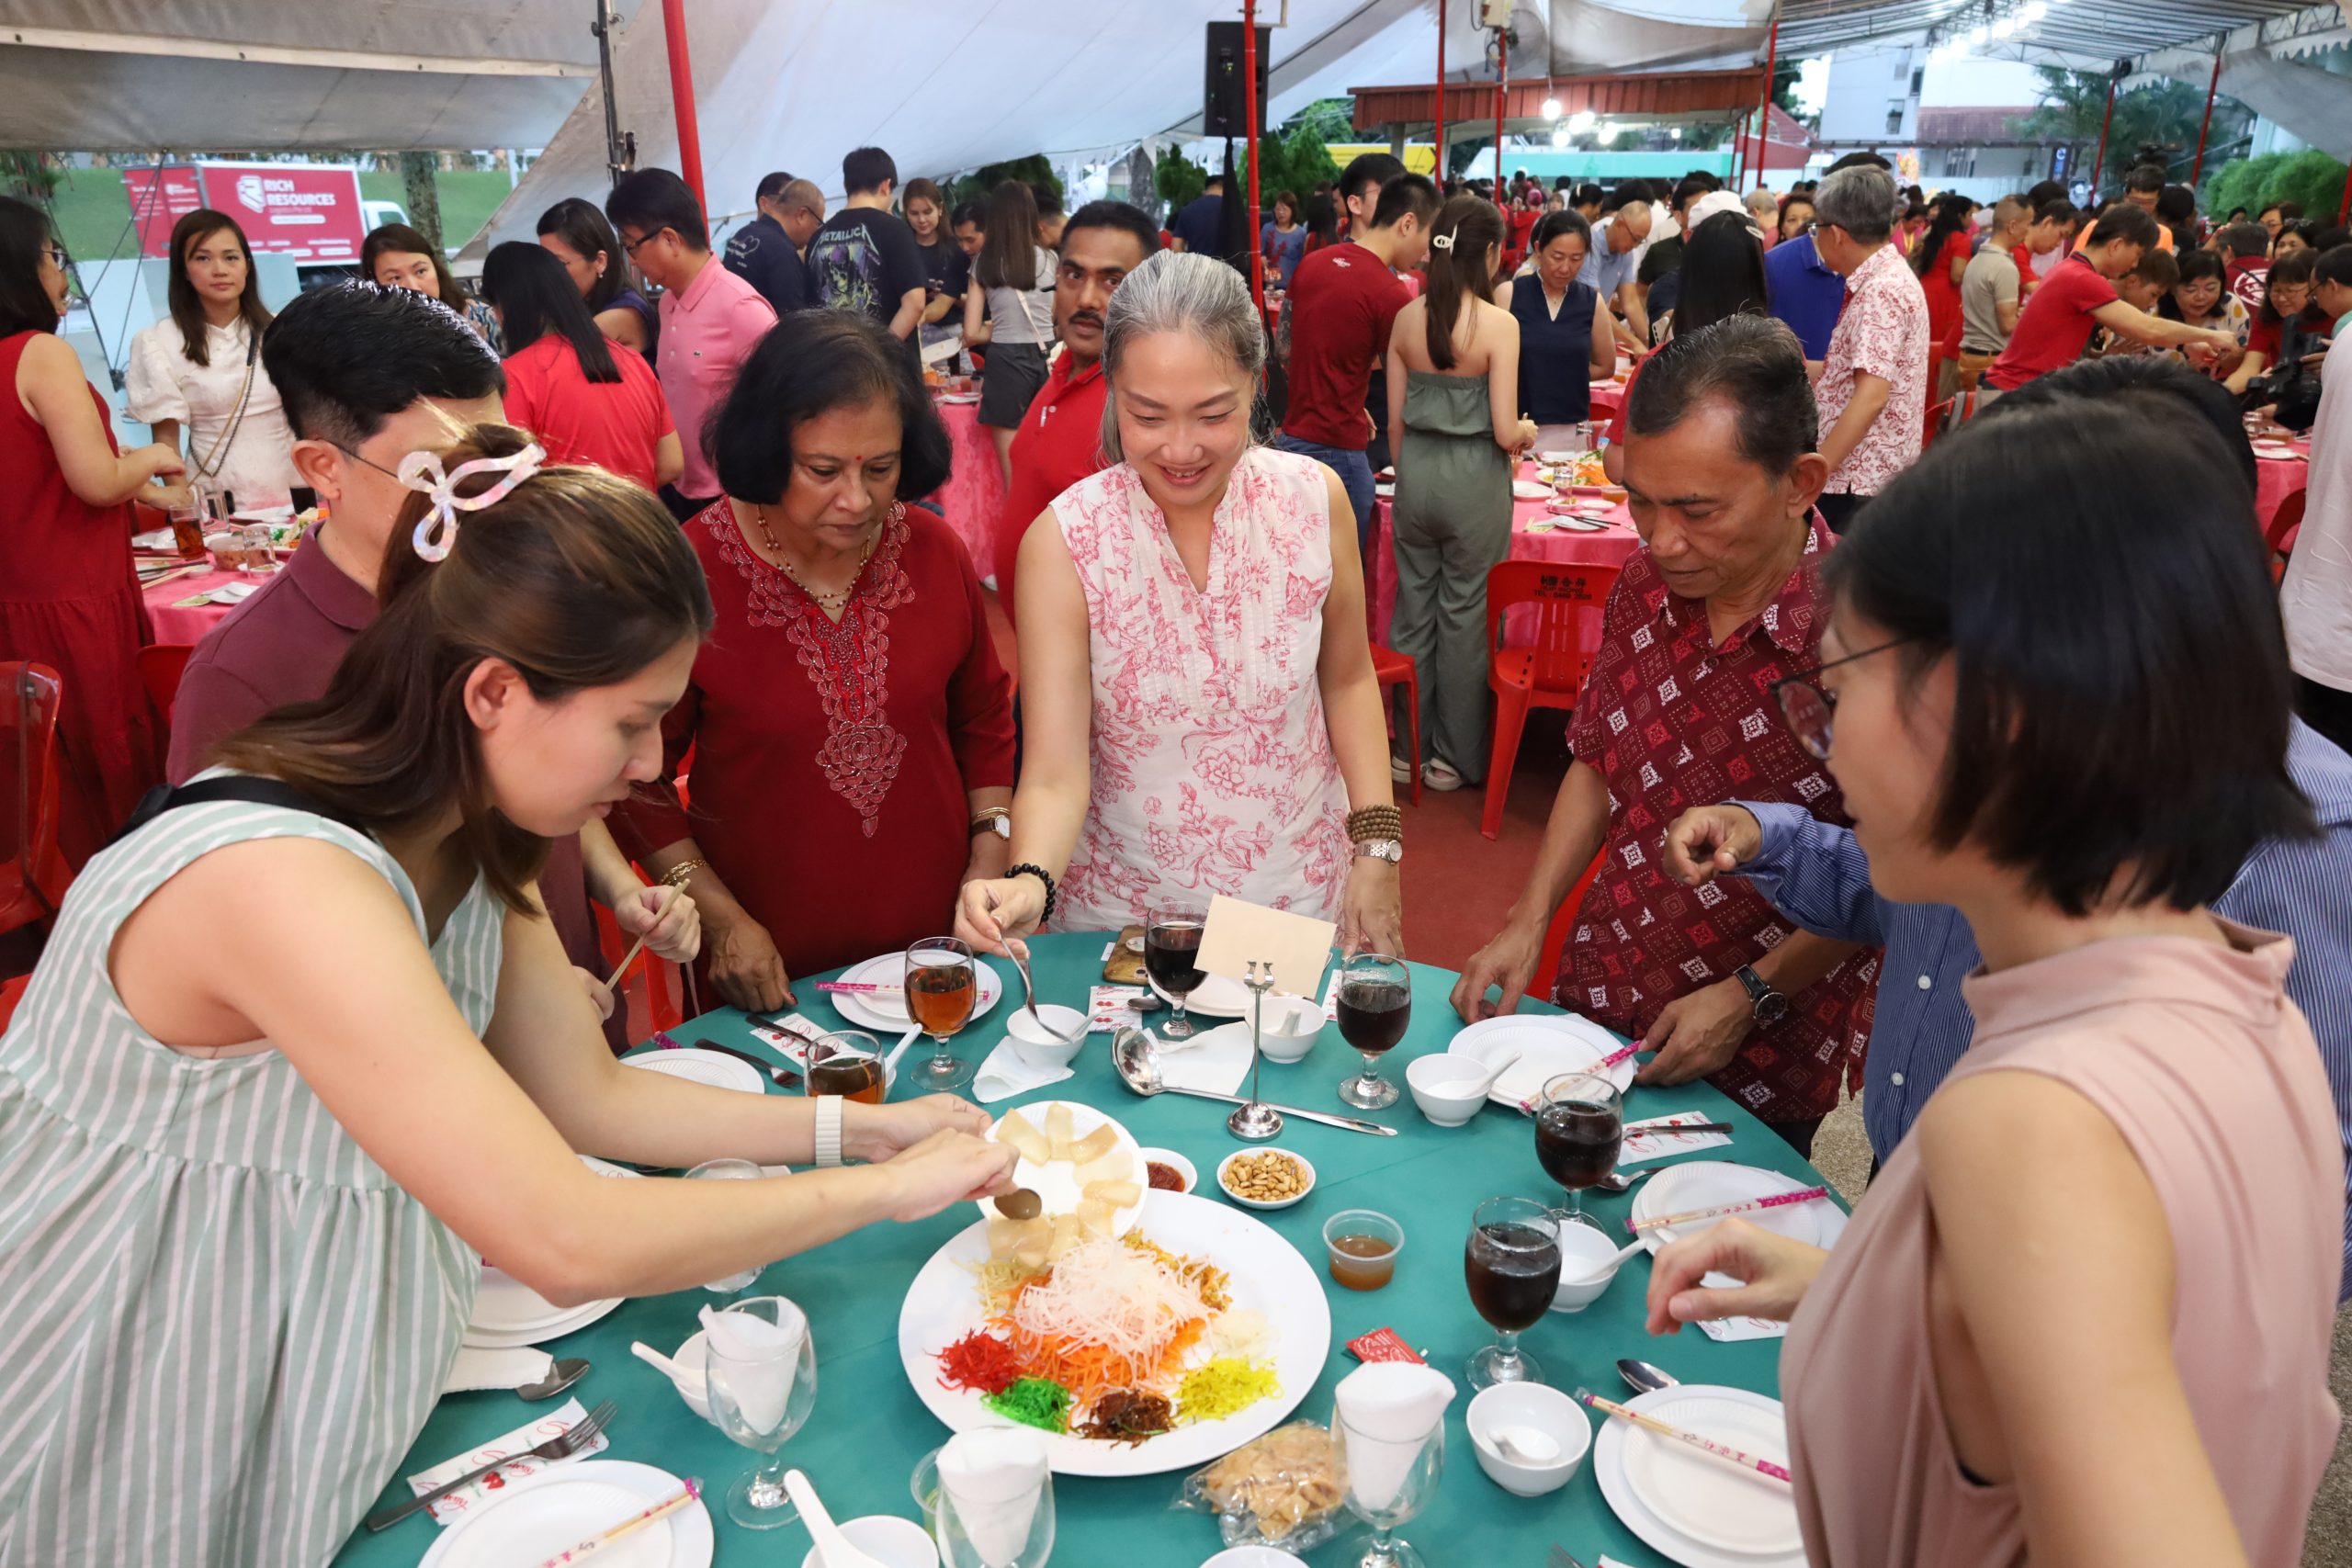 CNY celebrations with the Heartwarmers